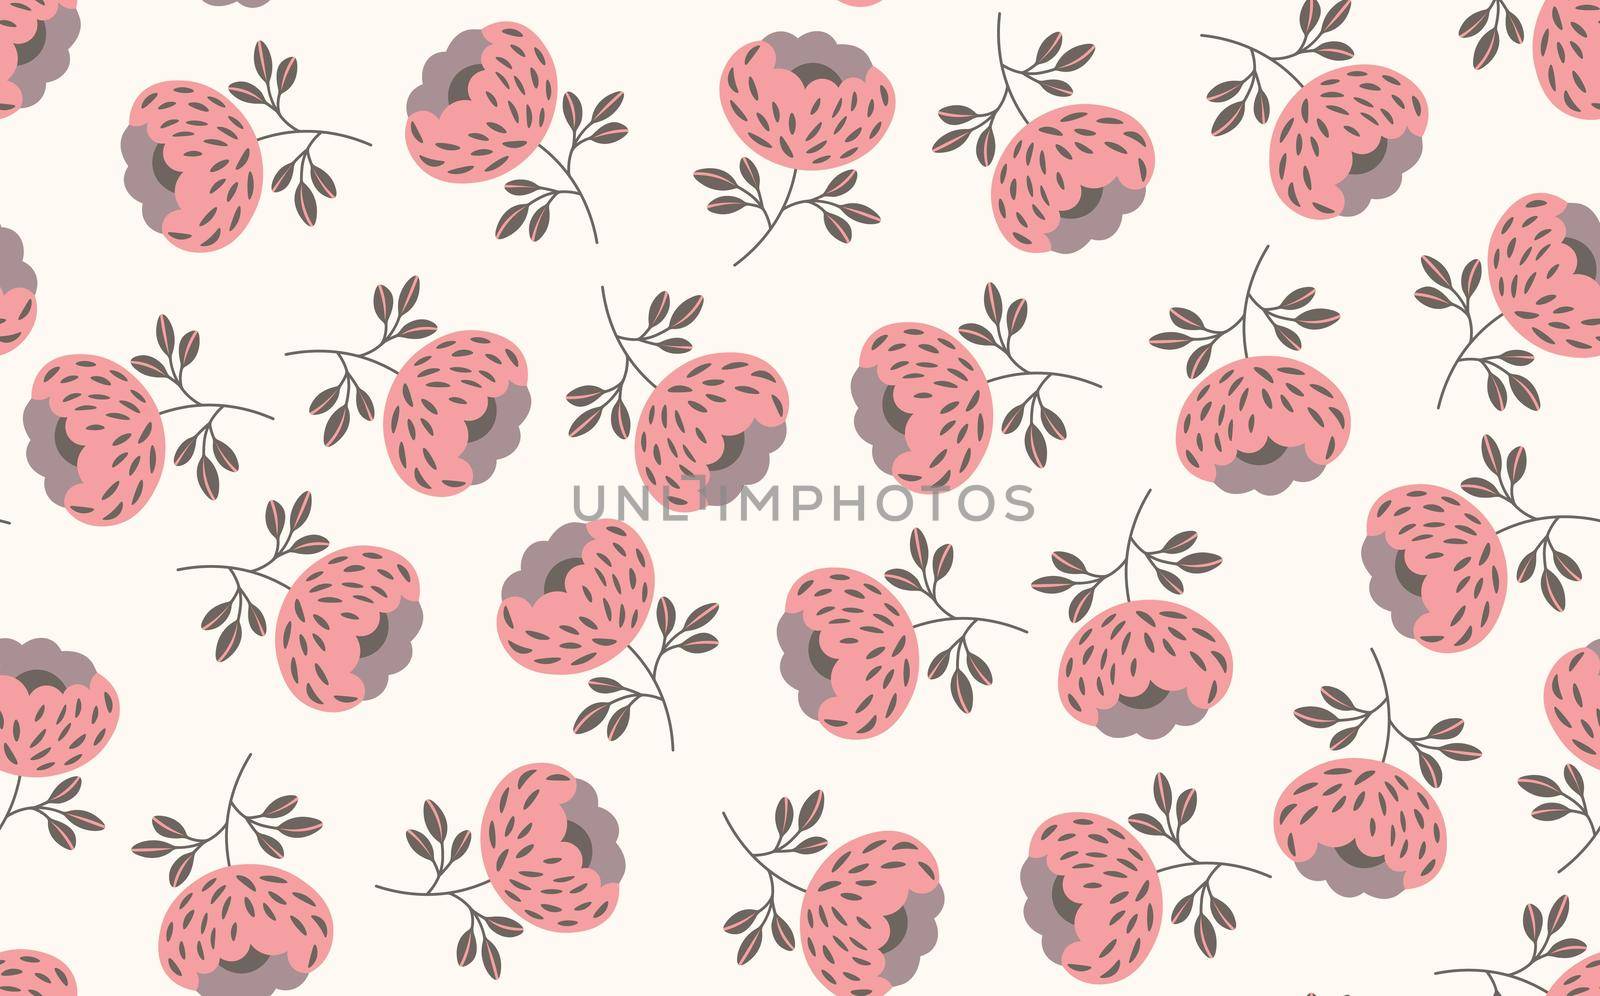 Seamless floral pattern based on traditional folk art ornaments. Colorful flowers on light background. Scandinavian style. Sweden nordic style. Vector illustration. Simple minimalistic pattern by allaku